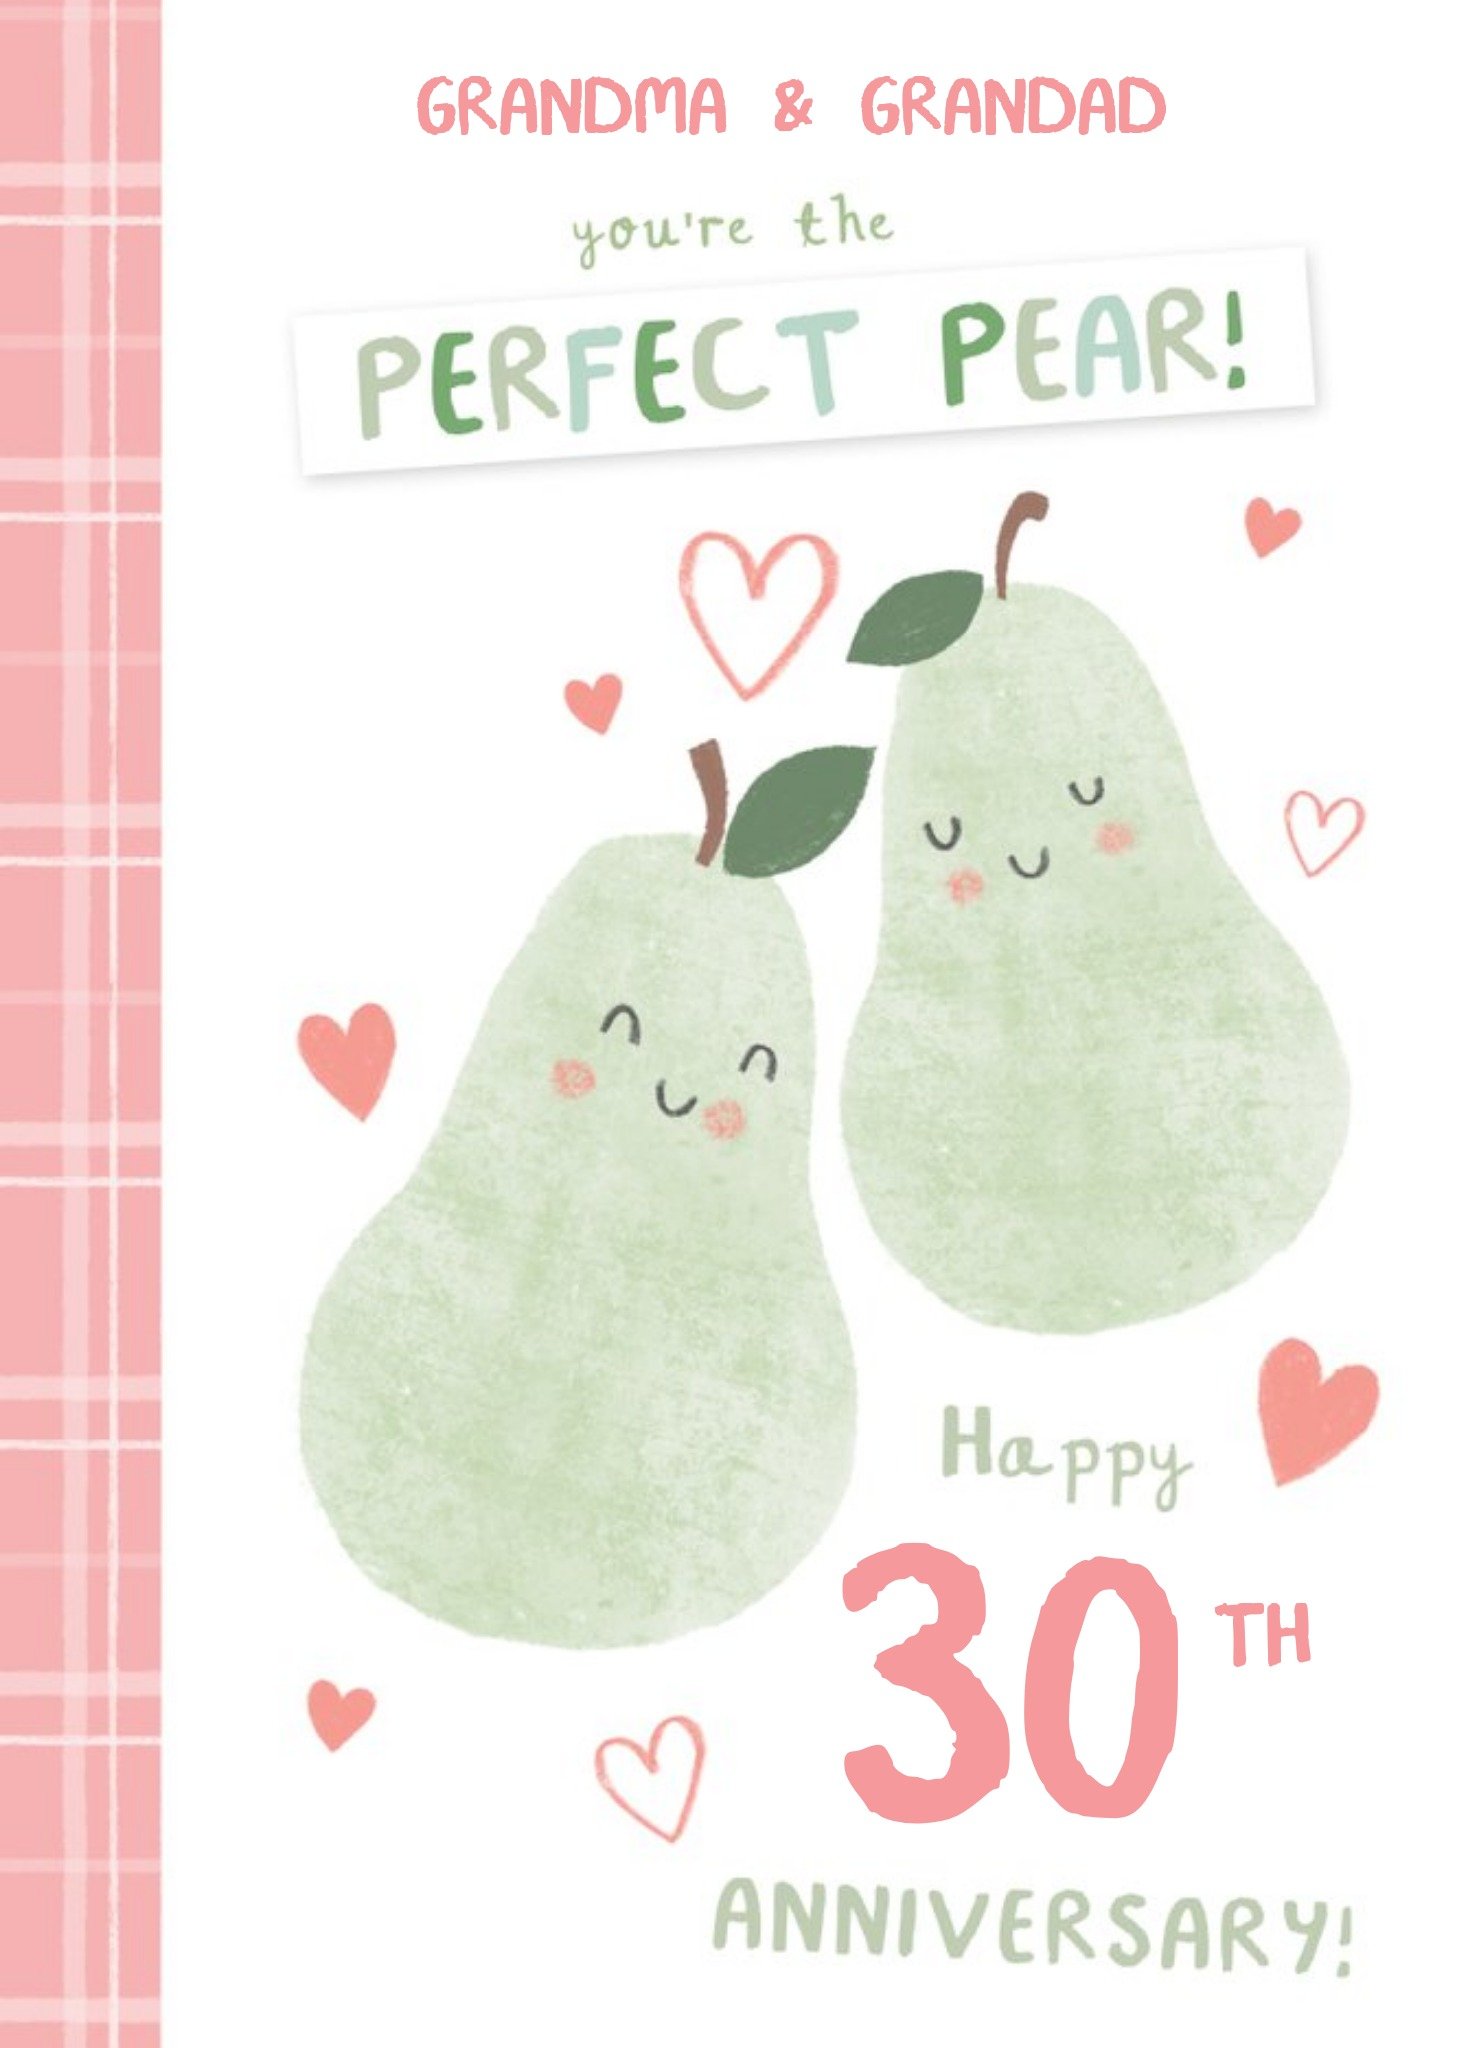 Love Hearts Millicent Venton Illustrated 30th Anniversary Cute Pear Card, Large